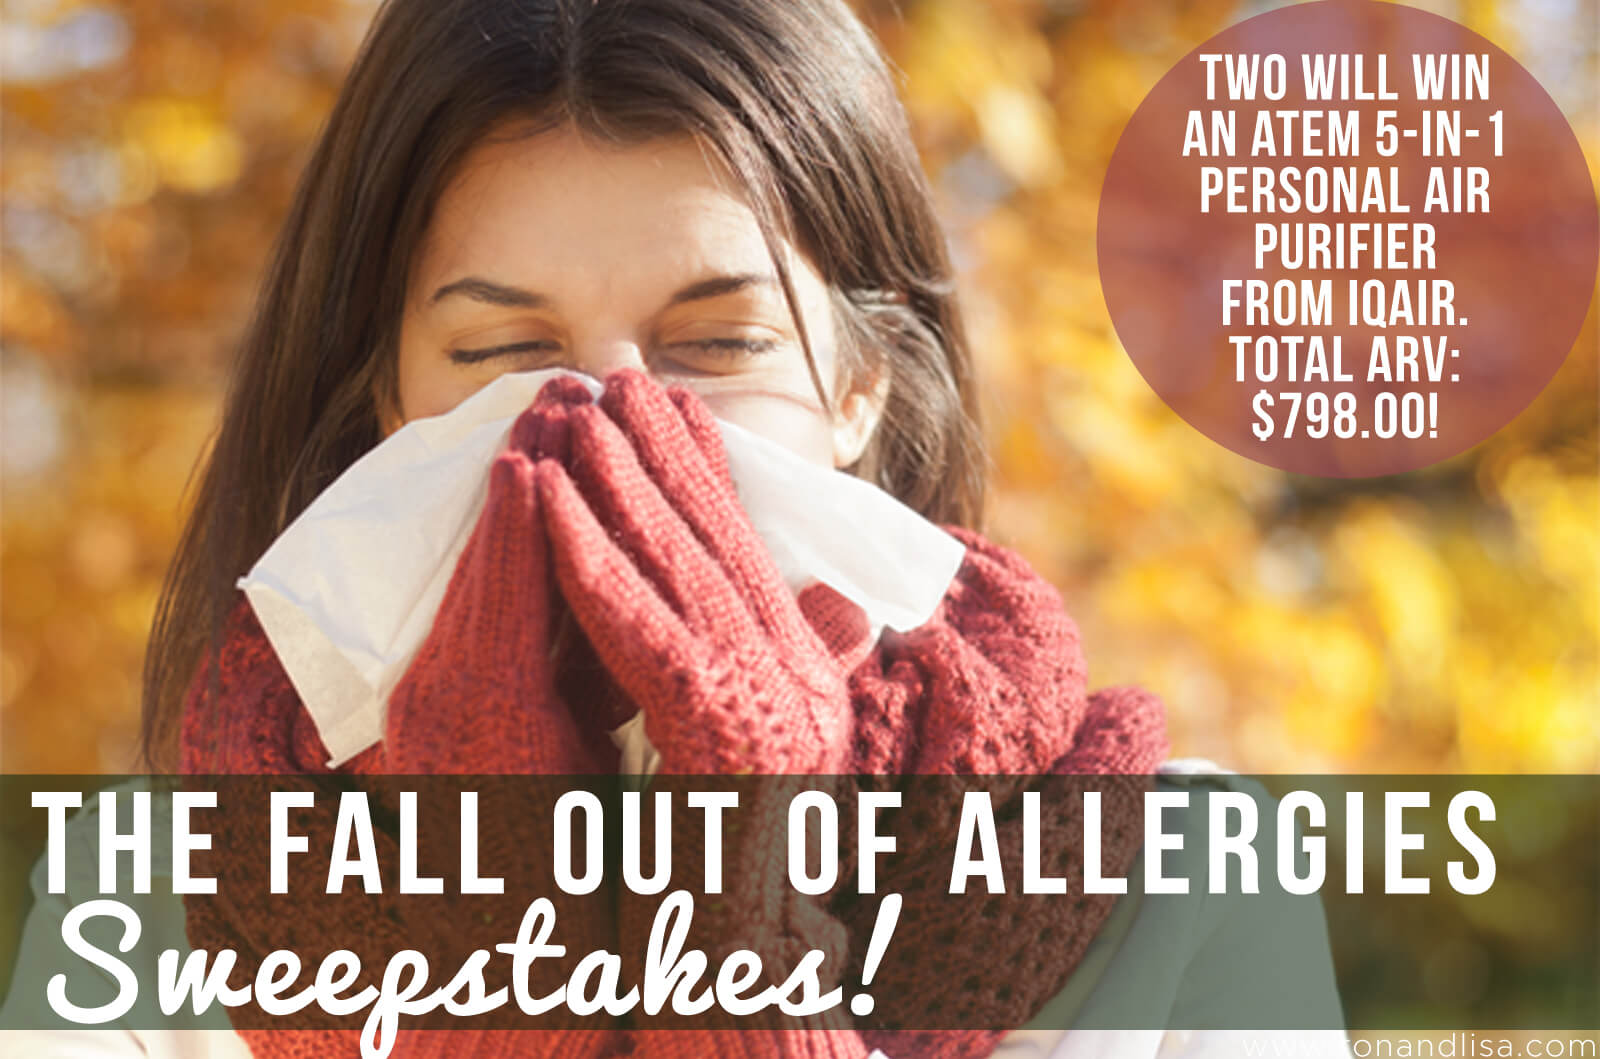 The Fall Out Of Allergies Sweepstakes!